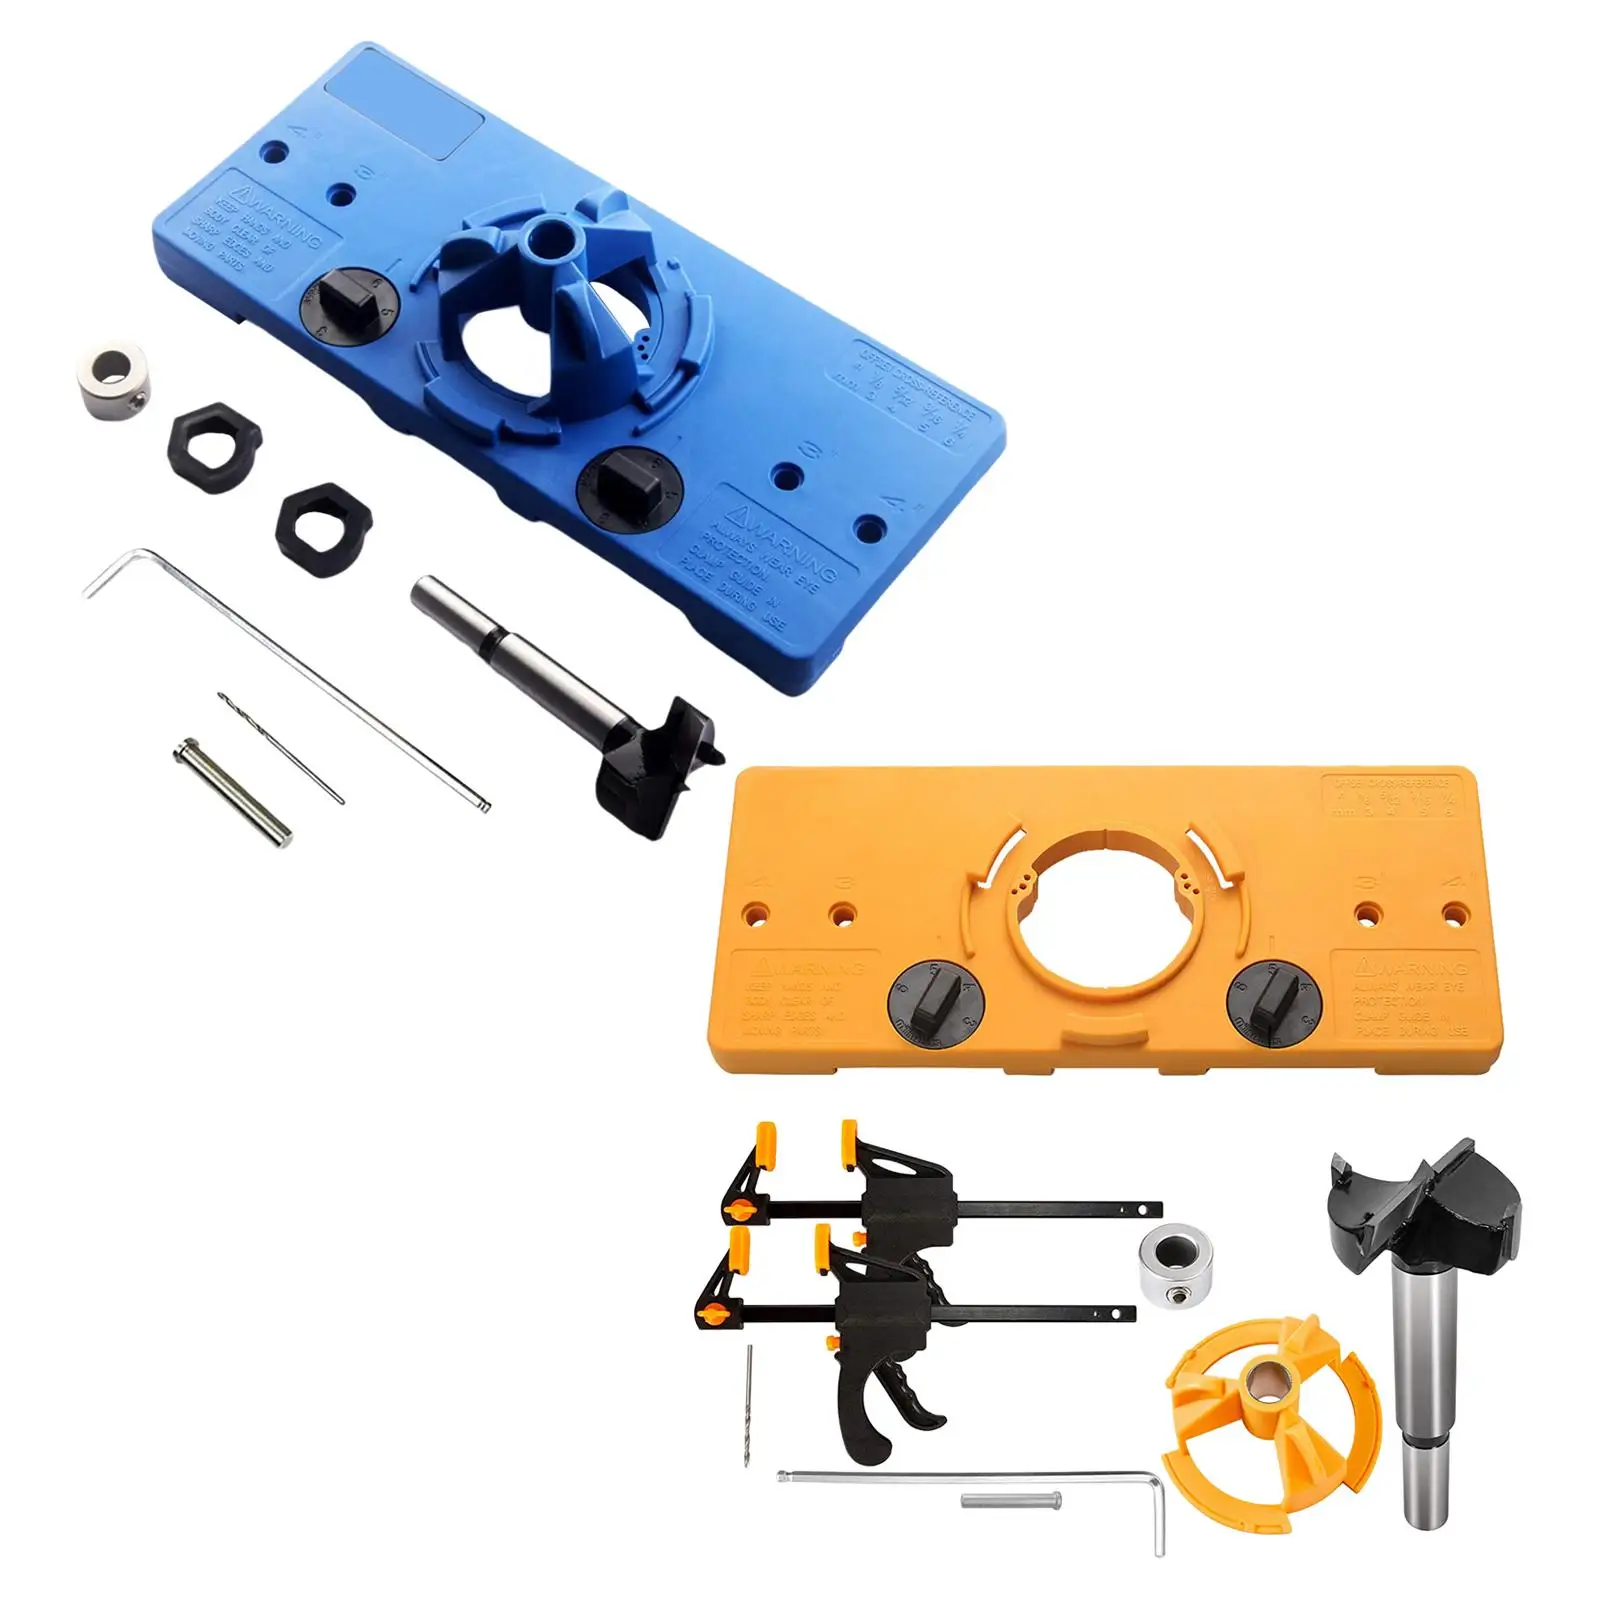 35mm Hinge Drilling Jig Guide Locator Hole Opener Fixture Drilling Tool Door Hinge for Woodworking Household Cupboard Furniture wood router table